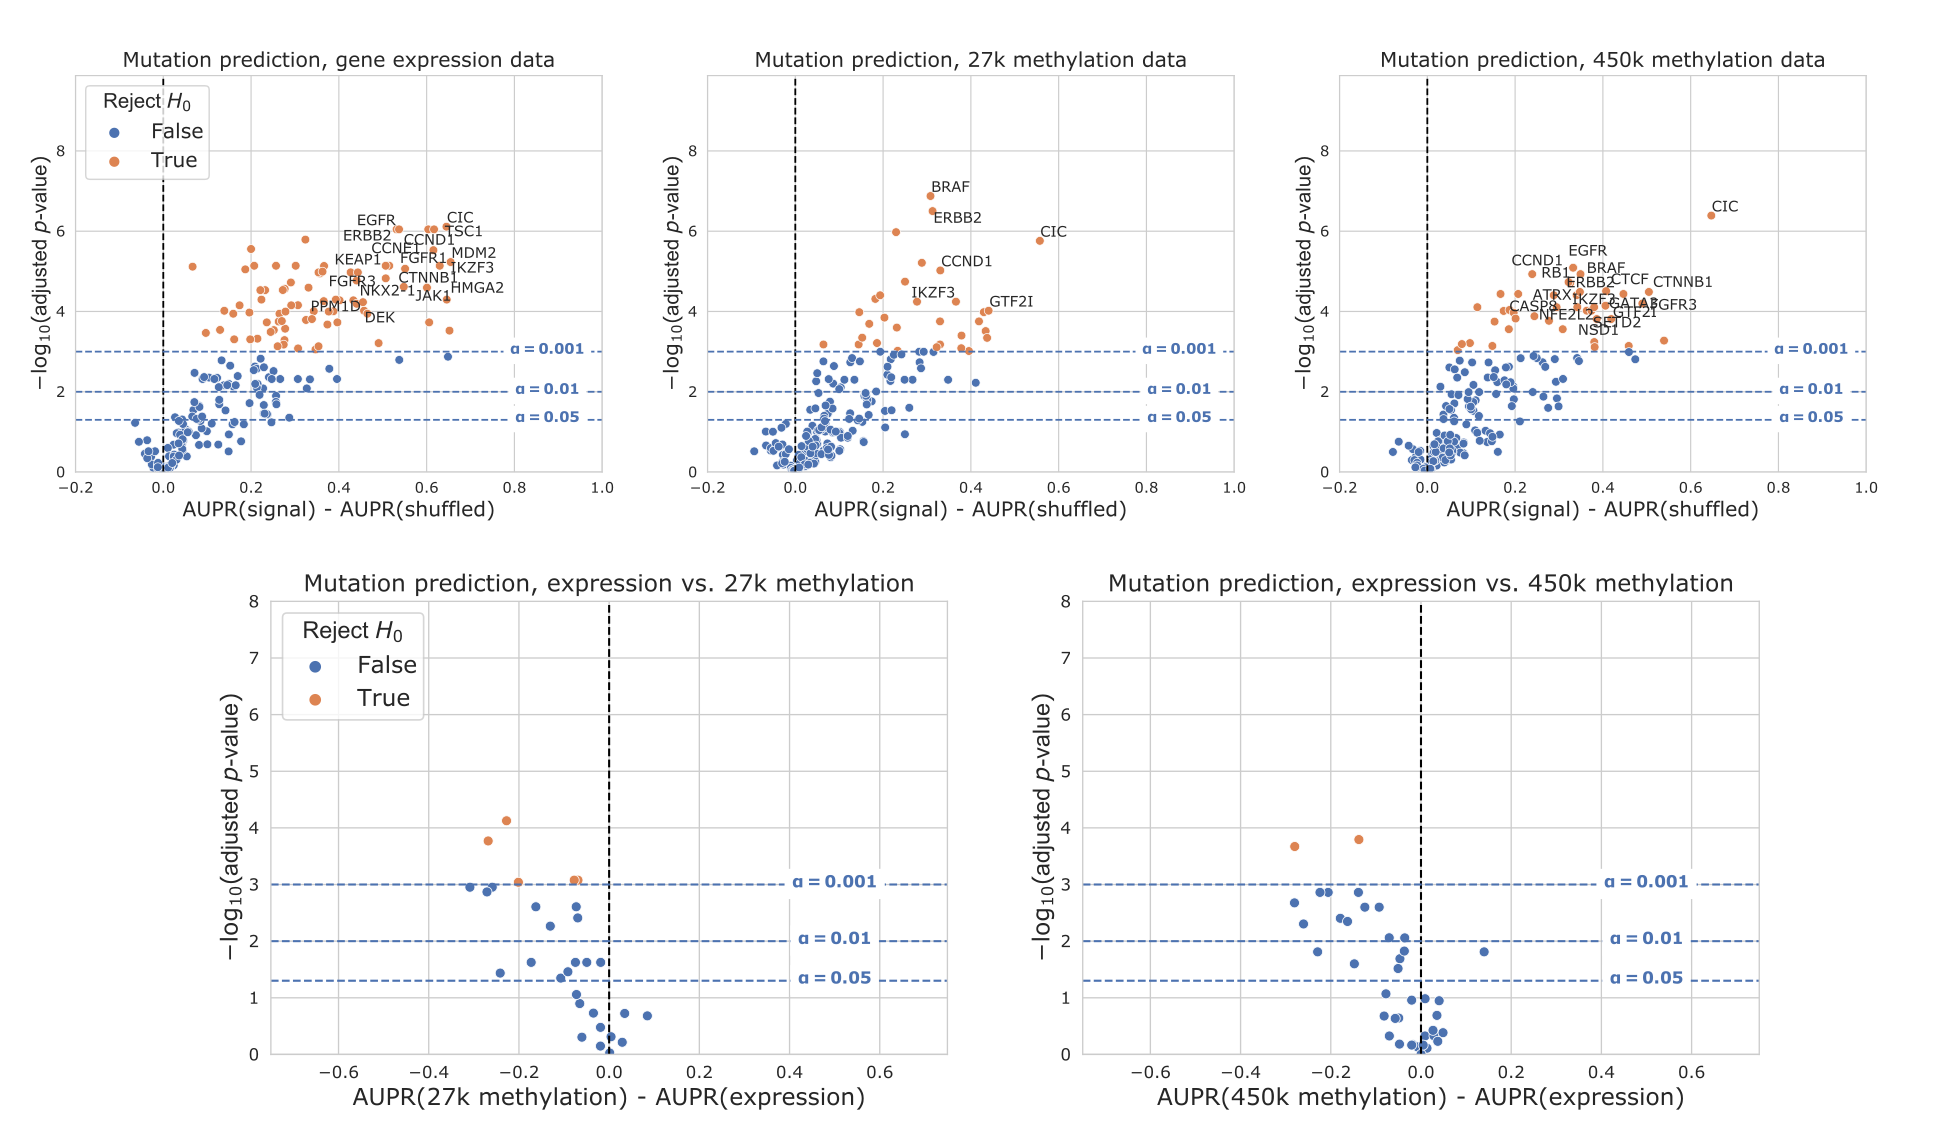 Figure 10: Volcano-like plots showing predictive performance for each gene in the cancer-related gene set for expression and DNA methylation, on the sample set used for the “all data types” experiments. The first row shows performance relative to the permuted baseline, and the second row shows direct comparisons between data types for genes that outperformed the permuted baseline only for both data types. The x-axis shows the difference in mean AUPR compared with a baseline model trained on permuted labels, and the y-axis shows p-values for a paired t-test comparing cross-validated AUPR values within folds.